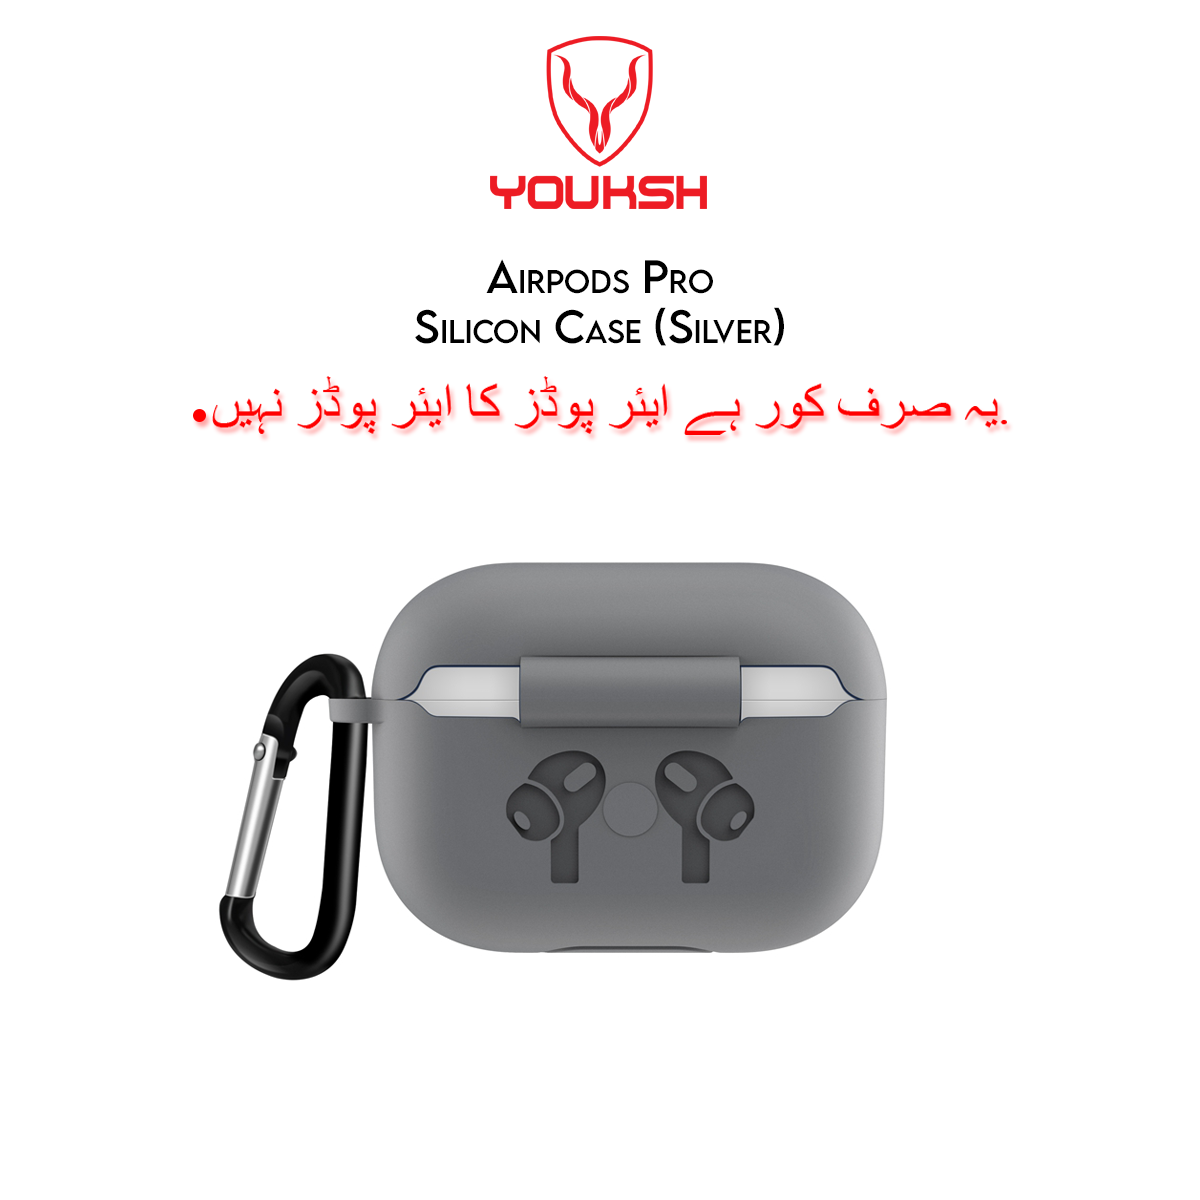 Apple Airpods Pro - YOUKSH Silicone Case - High Quality Shock Proof Case Only.